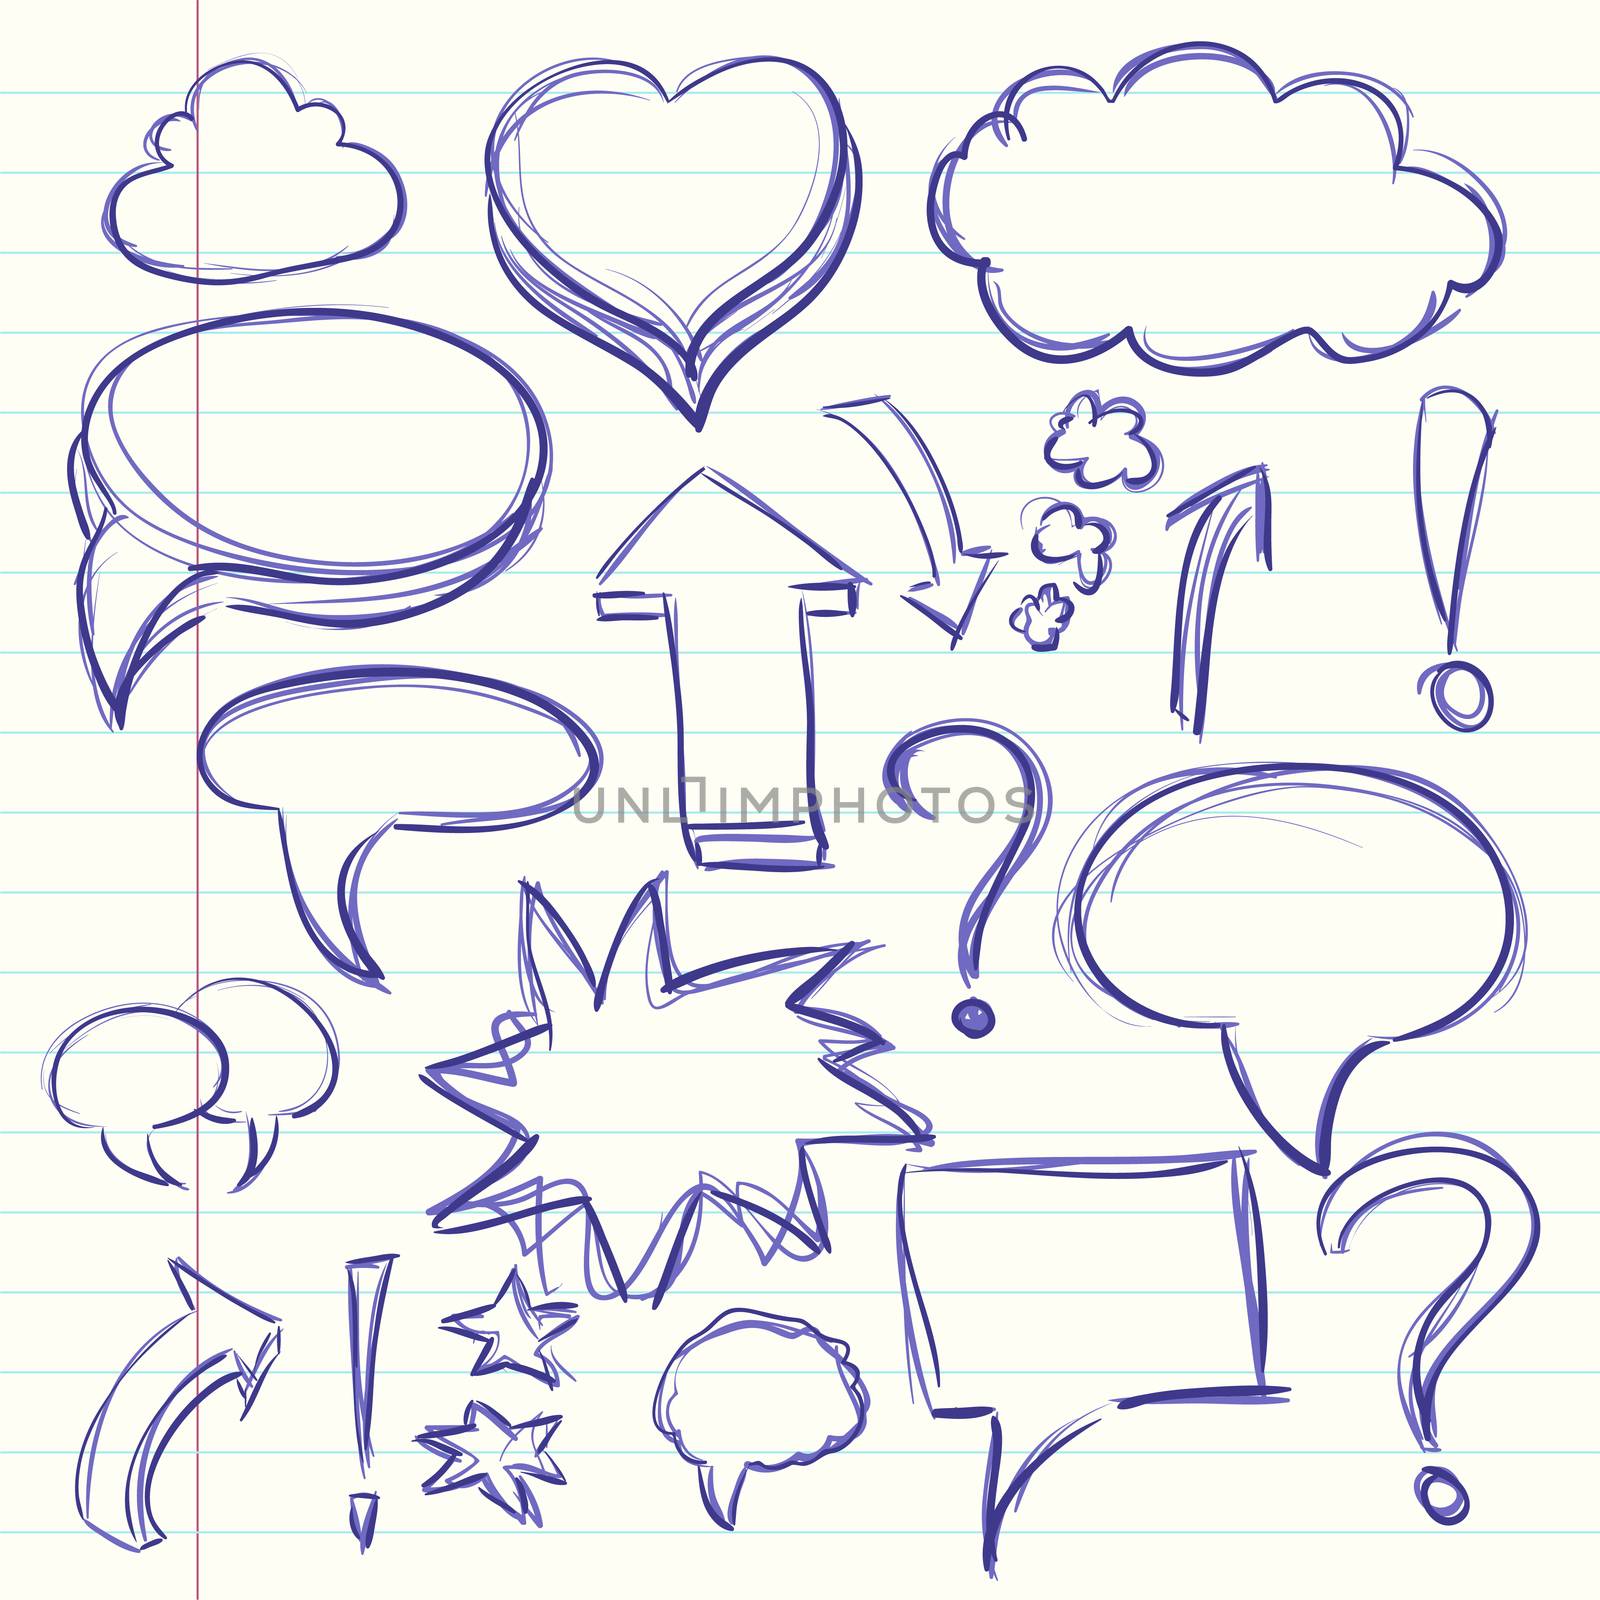 The cloud of thoughts conversation in the comics, exclamation and question marks. Collection sketch drawing. by Adamchuk